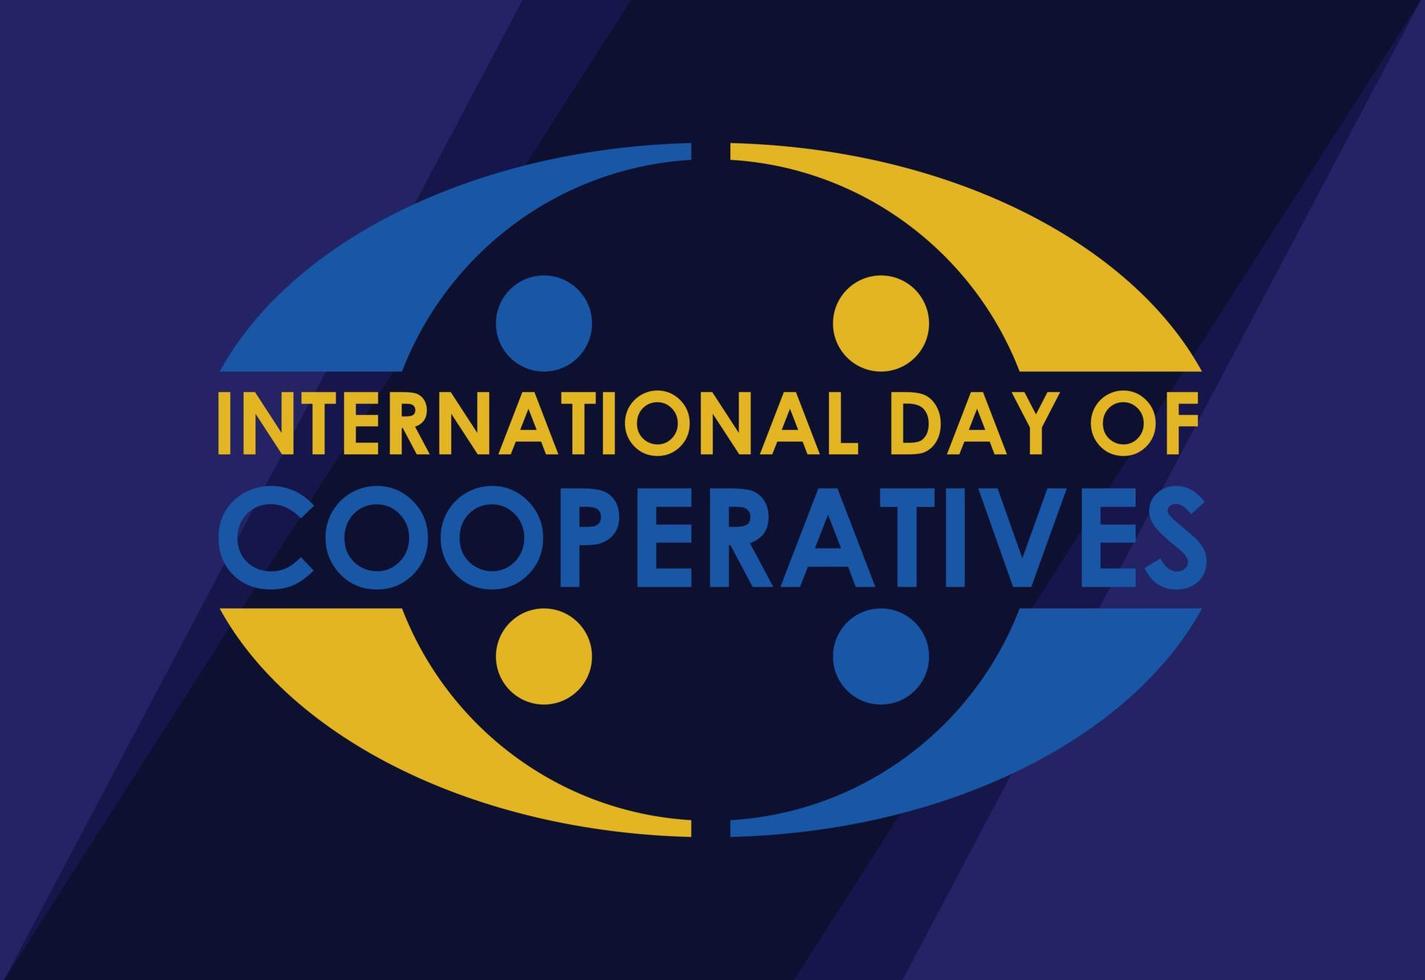 International Day of Cooperatives Celebration Vector Template